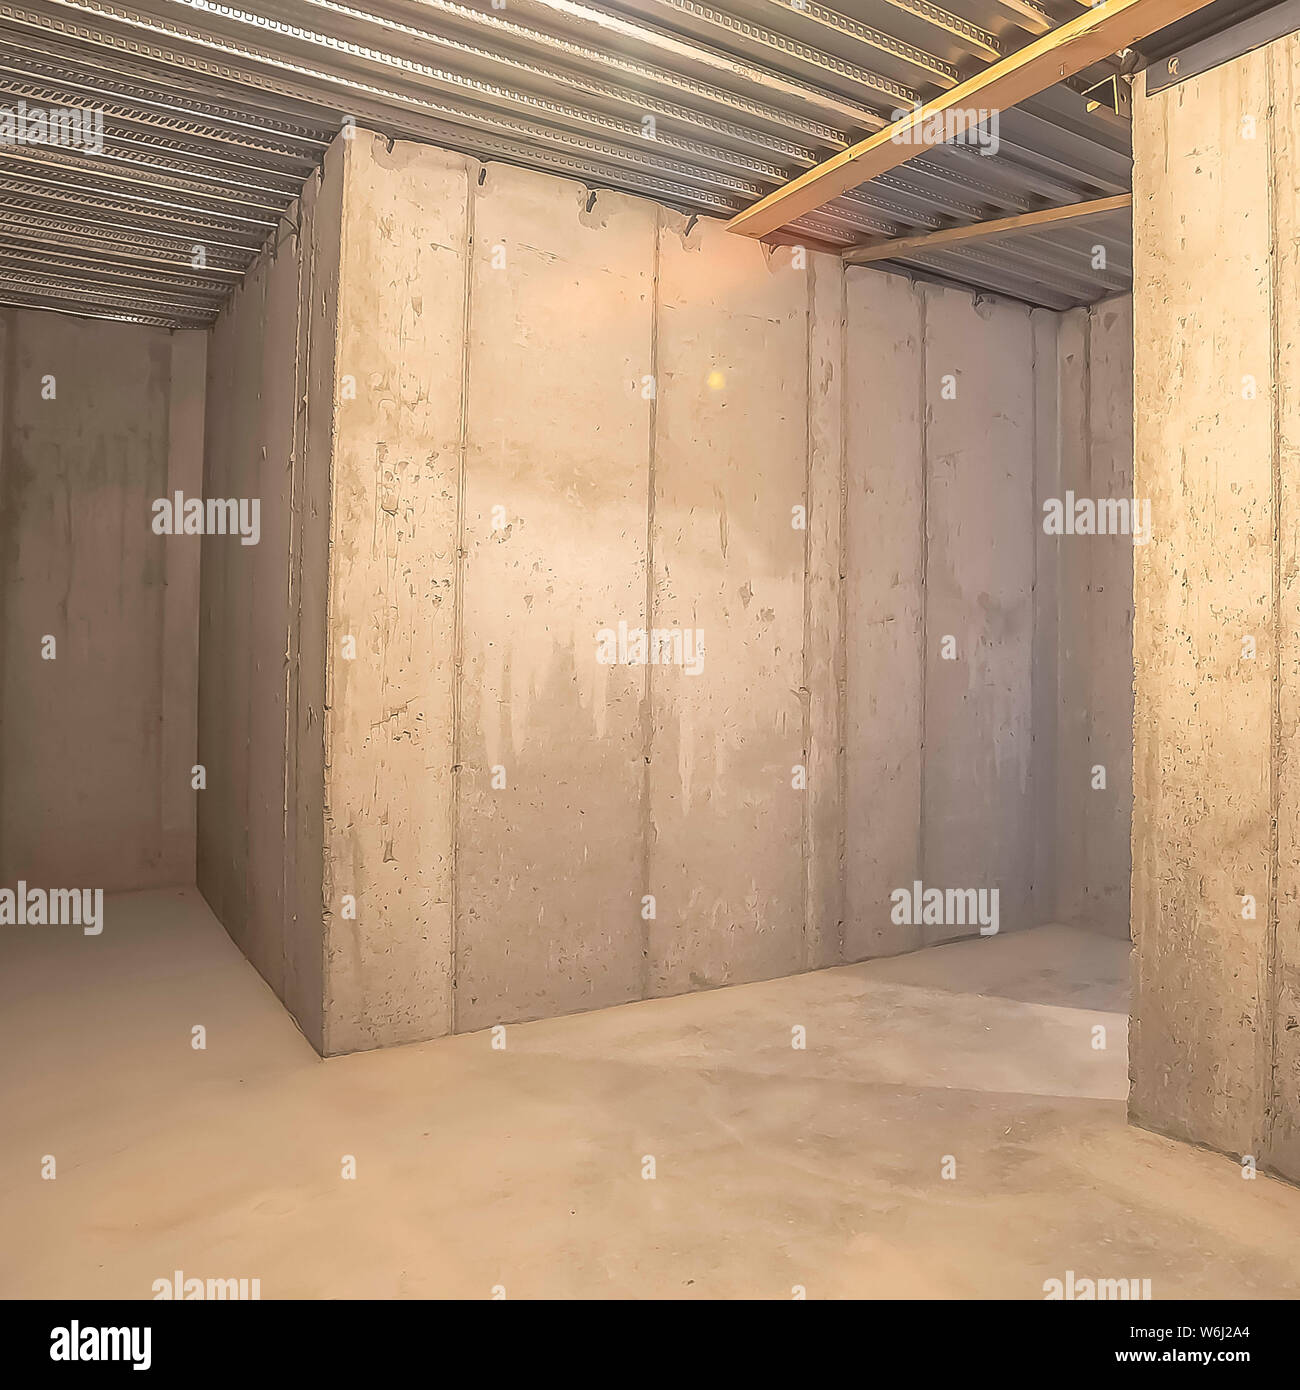 Square Interior Of An Empty Building With Concrete Wall And